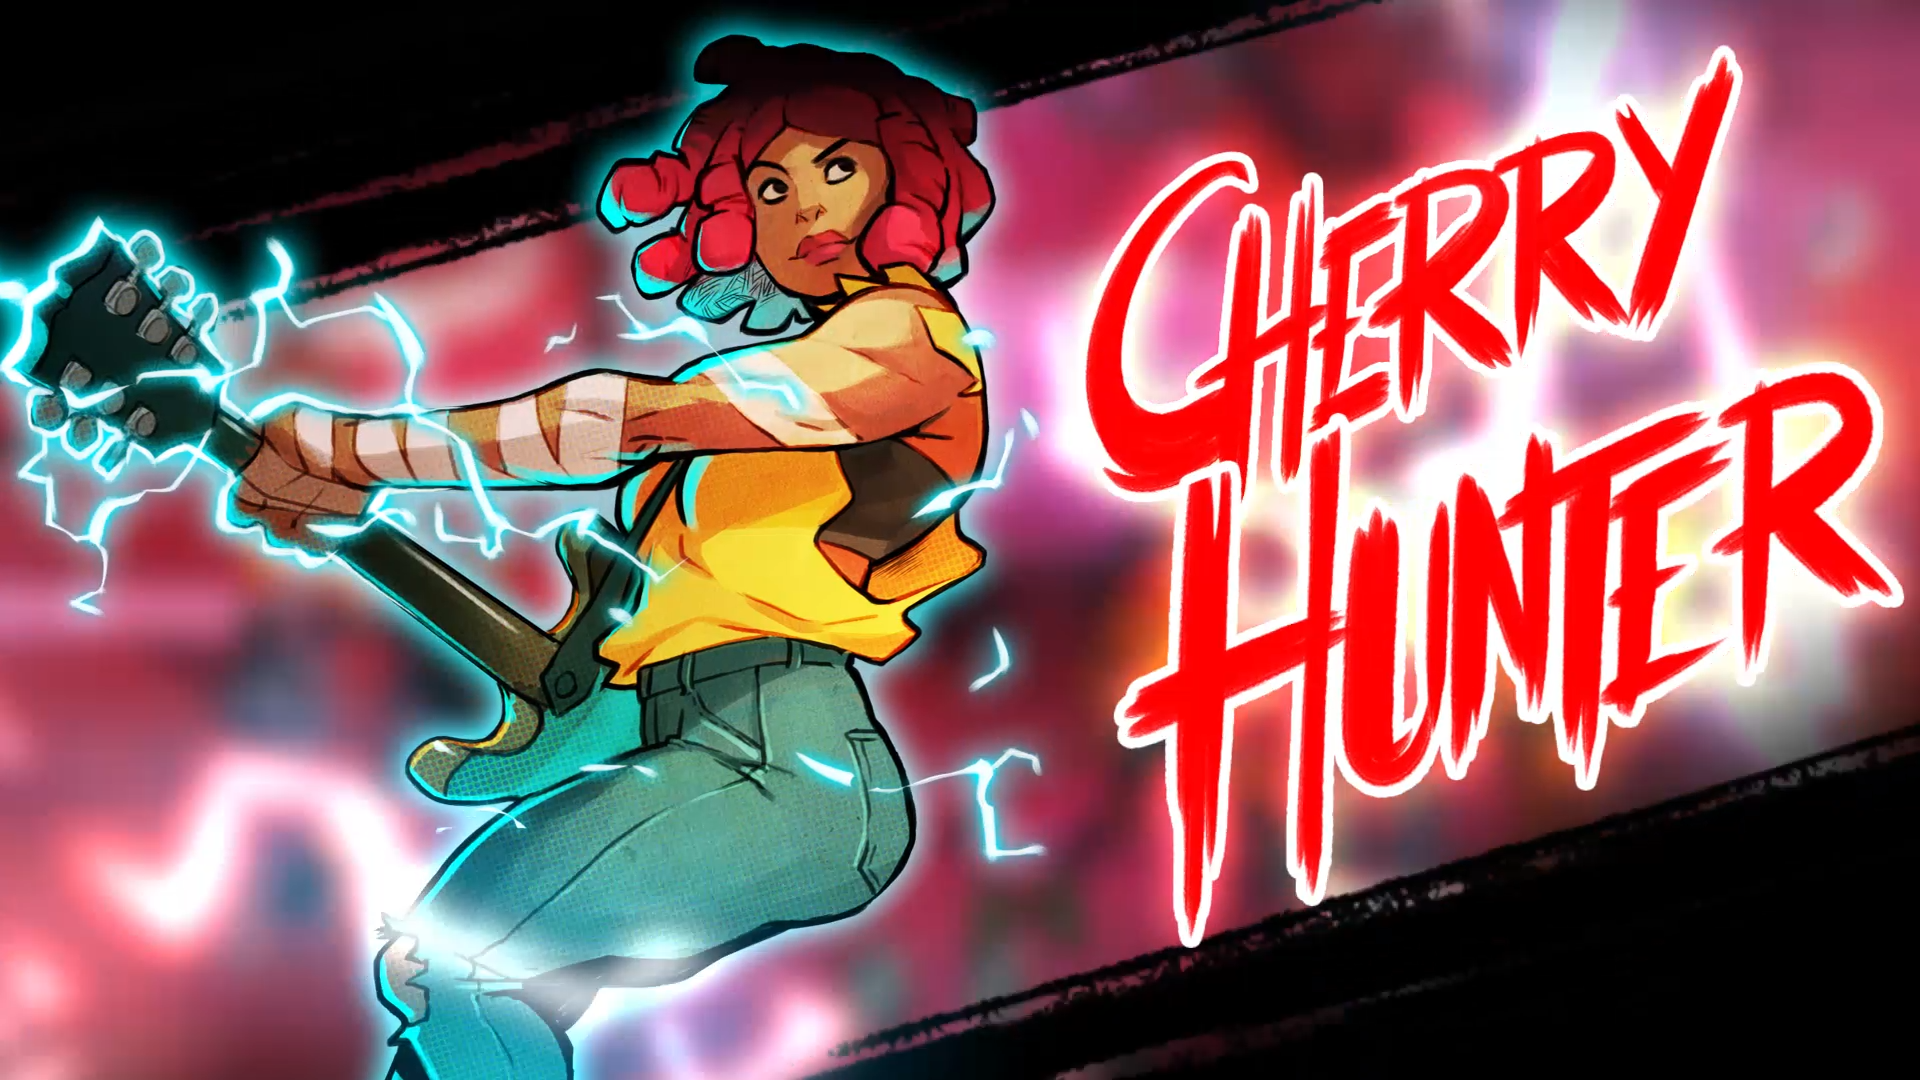 Image for Streets of Rage 4 powerslides onto Switch with new hero Cherry Hunter